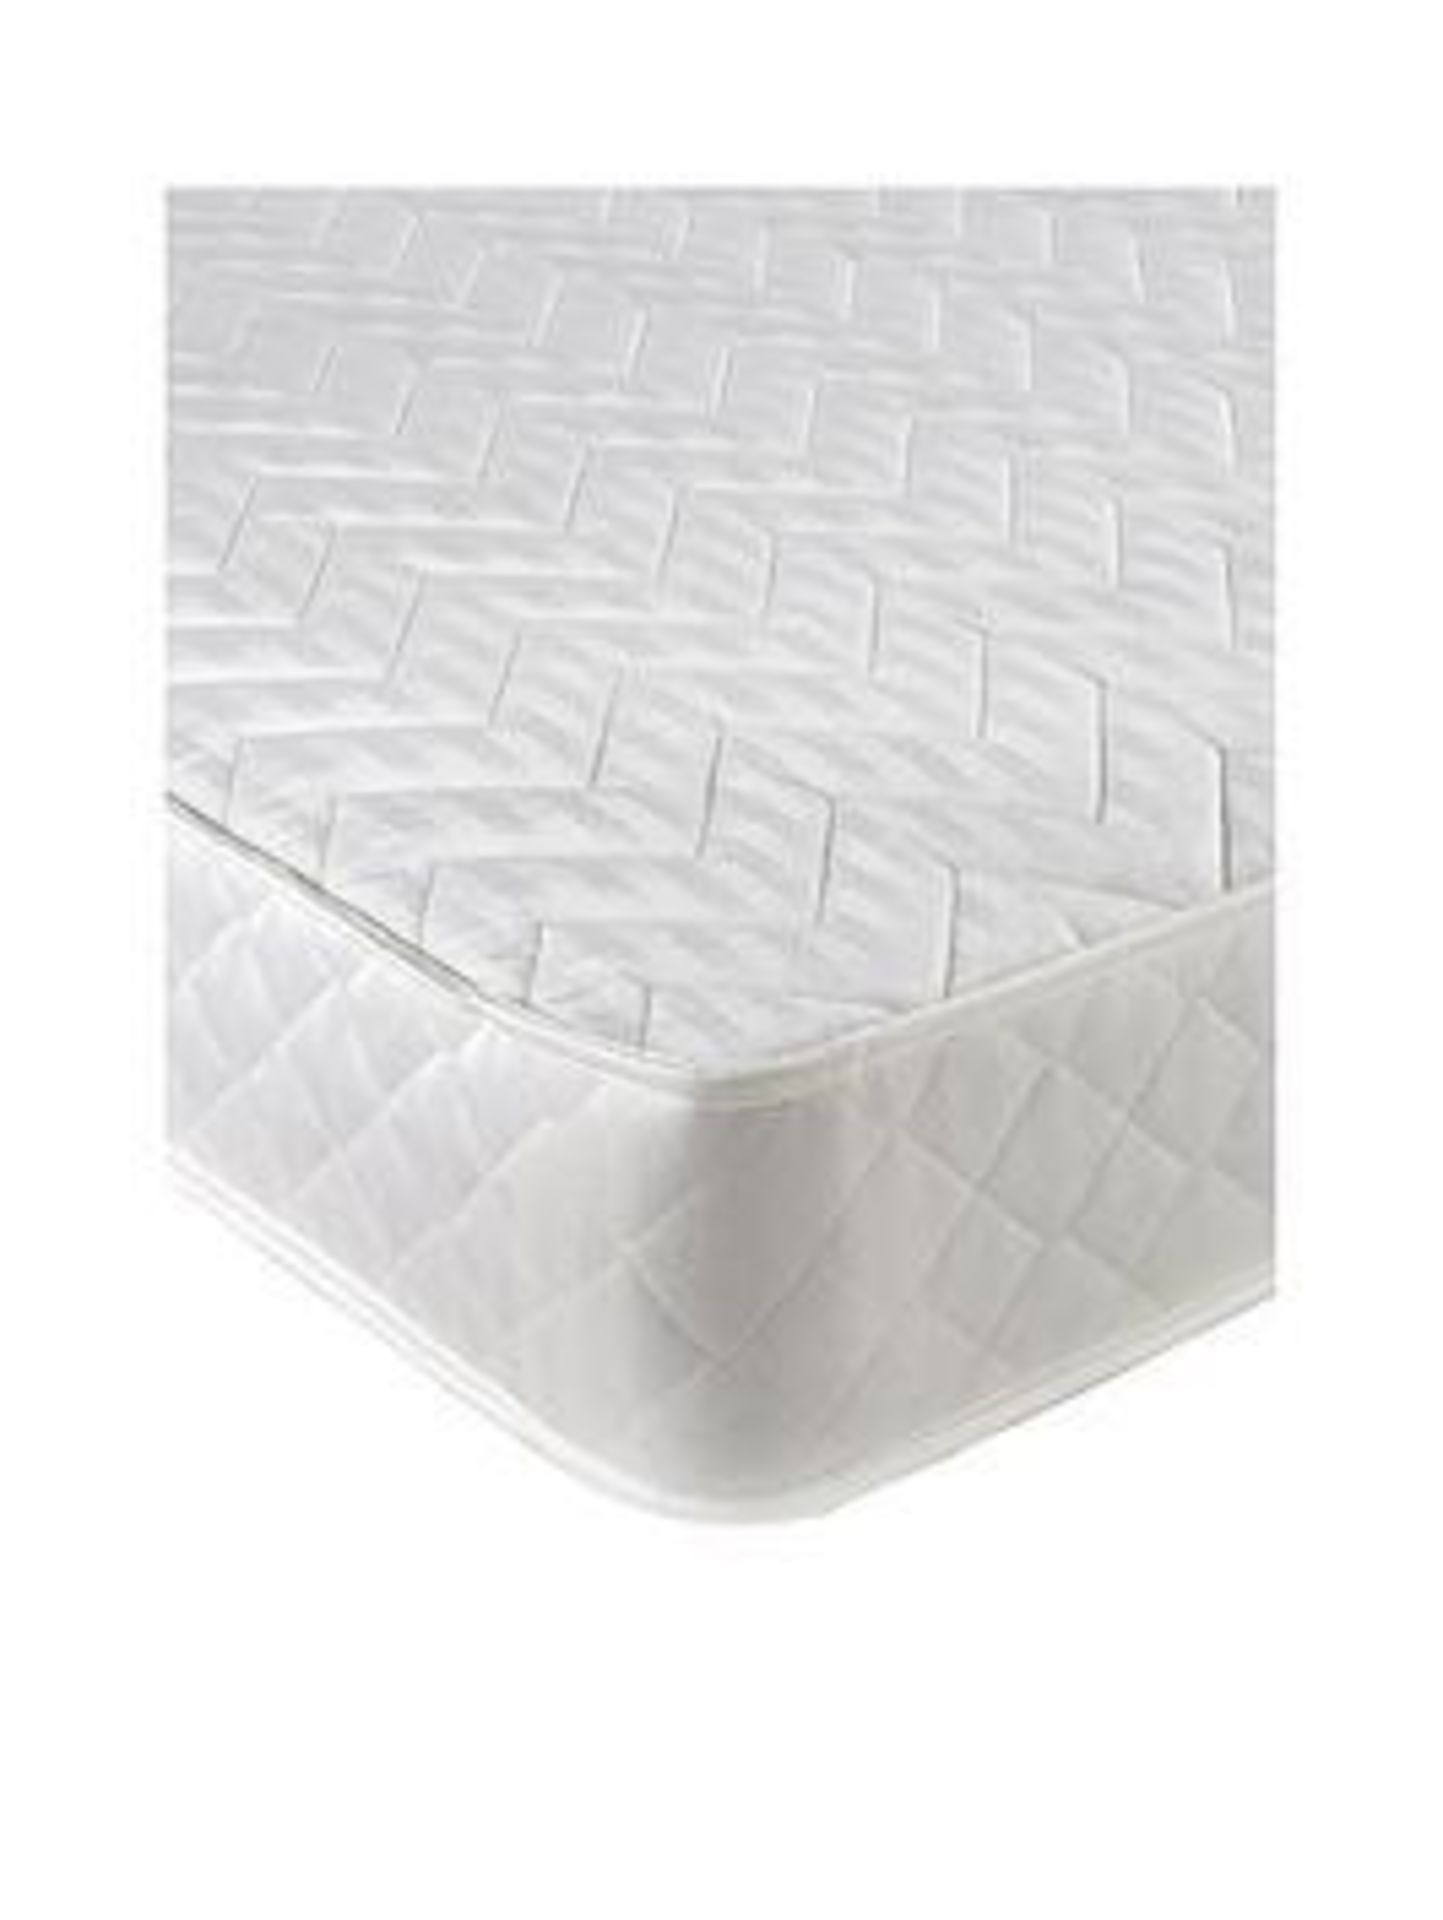 Boxed Item Airsprung Luxury Quilted Super King Mattress [One Color] 20X180X200Cm Rrp:£394.0